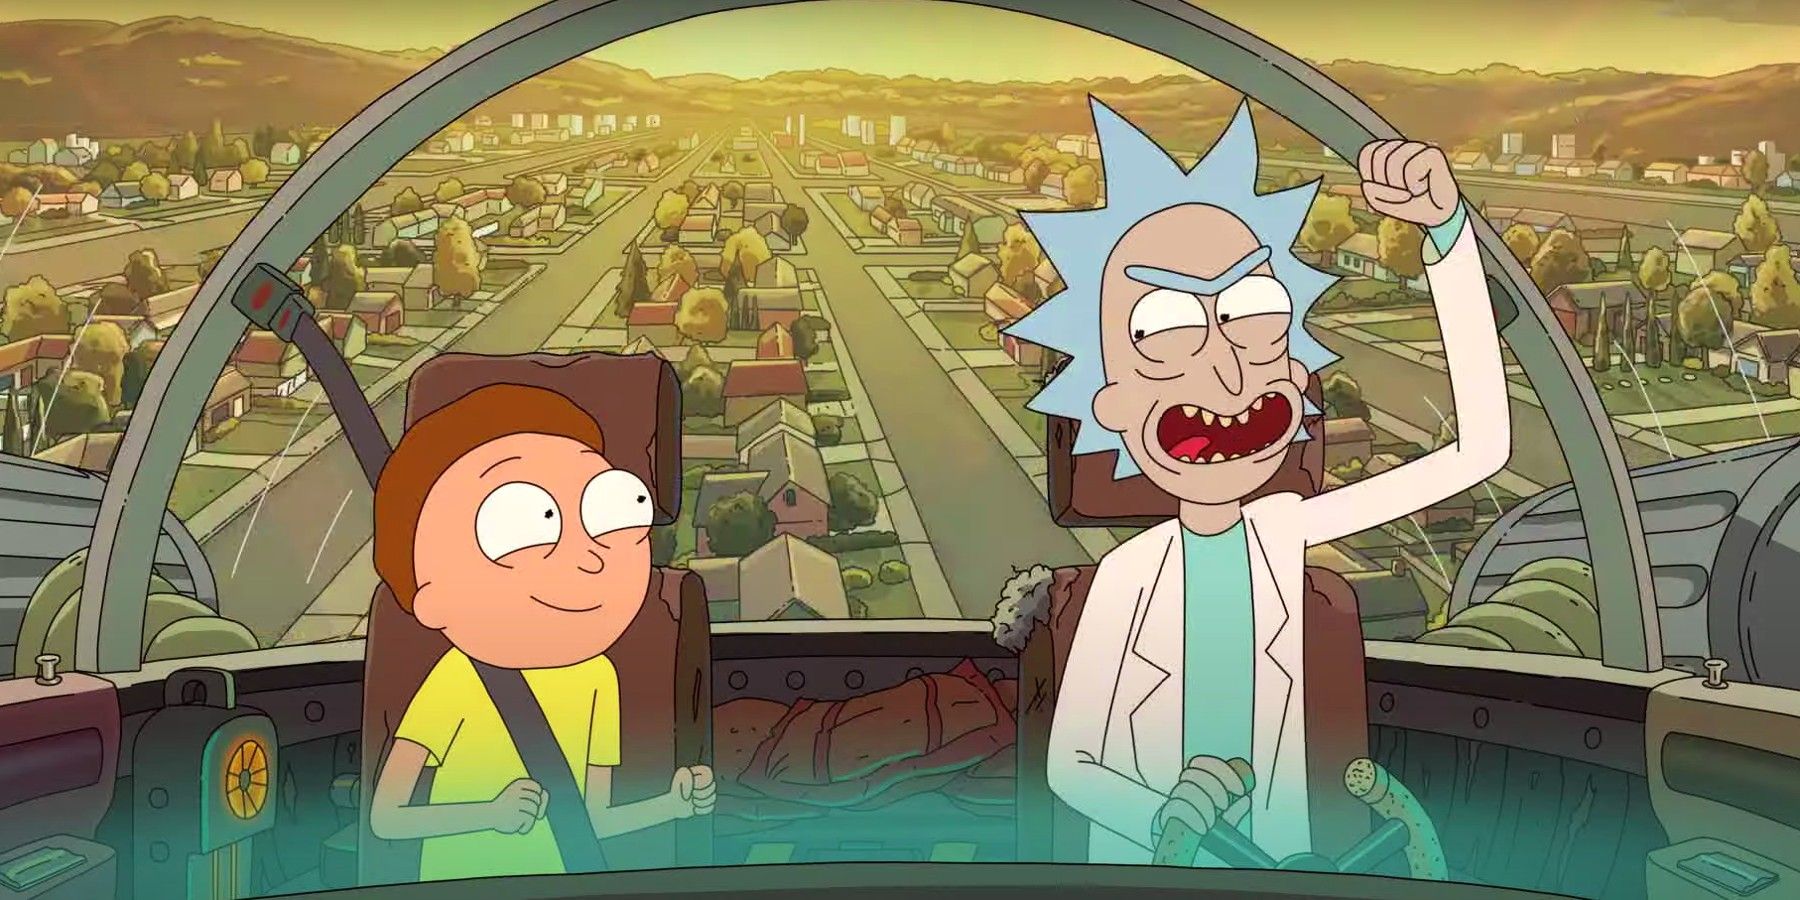 Live wallpaper Rick and Morty in the car / interface personalization